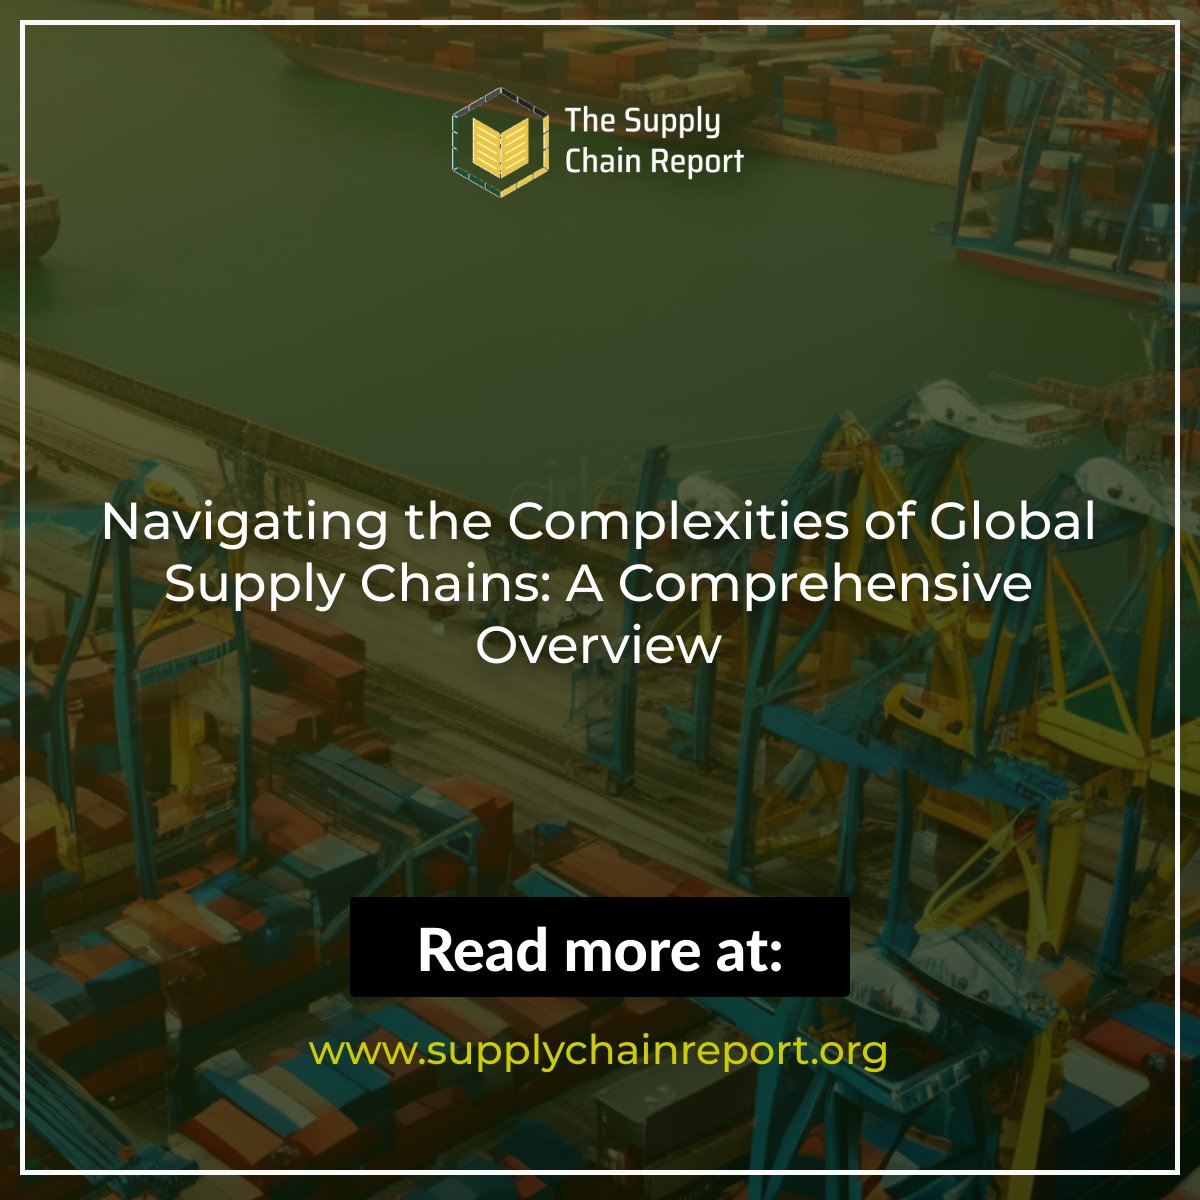 Navigating the Complexities of Global Supply Chains: A Comprehensive Overview
Read more here: supplychainreport.org/xp9u
#TheSupplyChainReport #globalsupplychain #navigatingcomplexity #supplychainmanagement #globaltrade